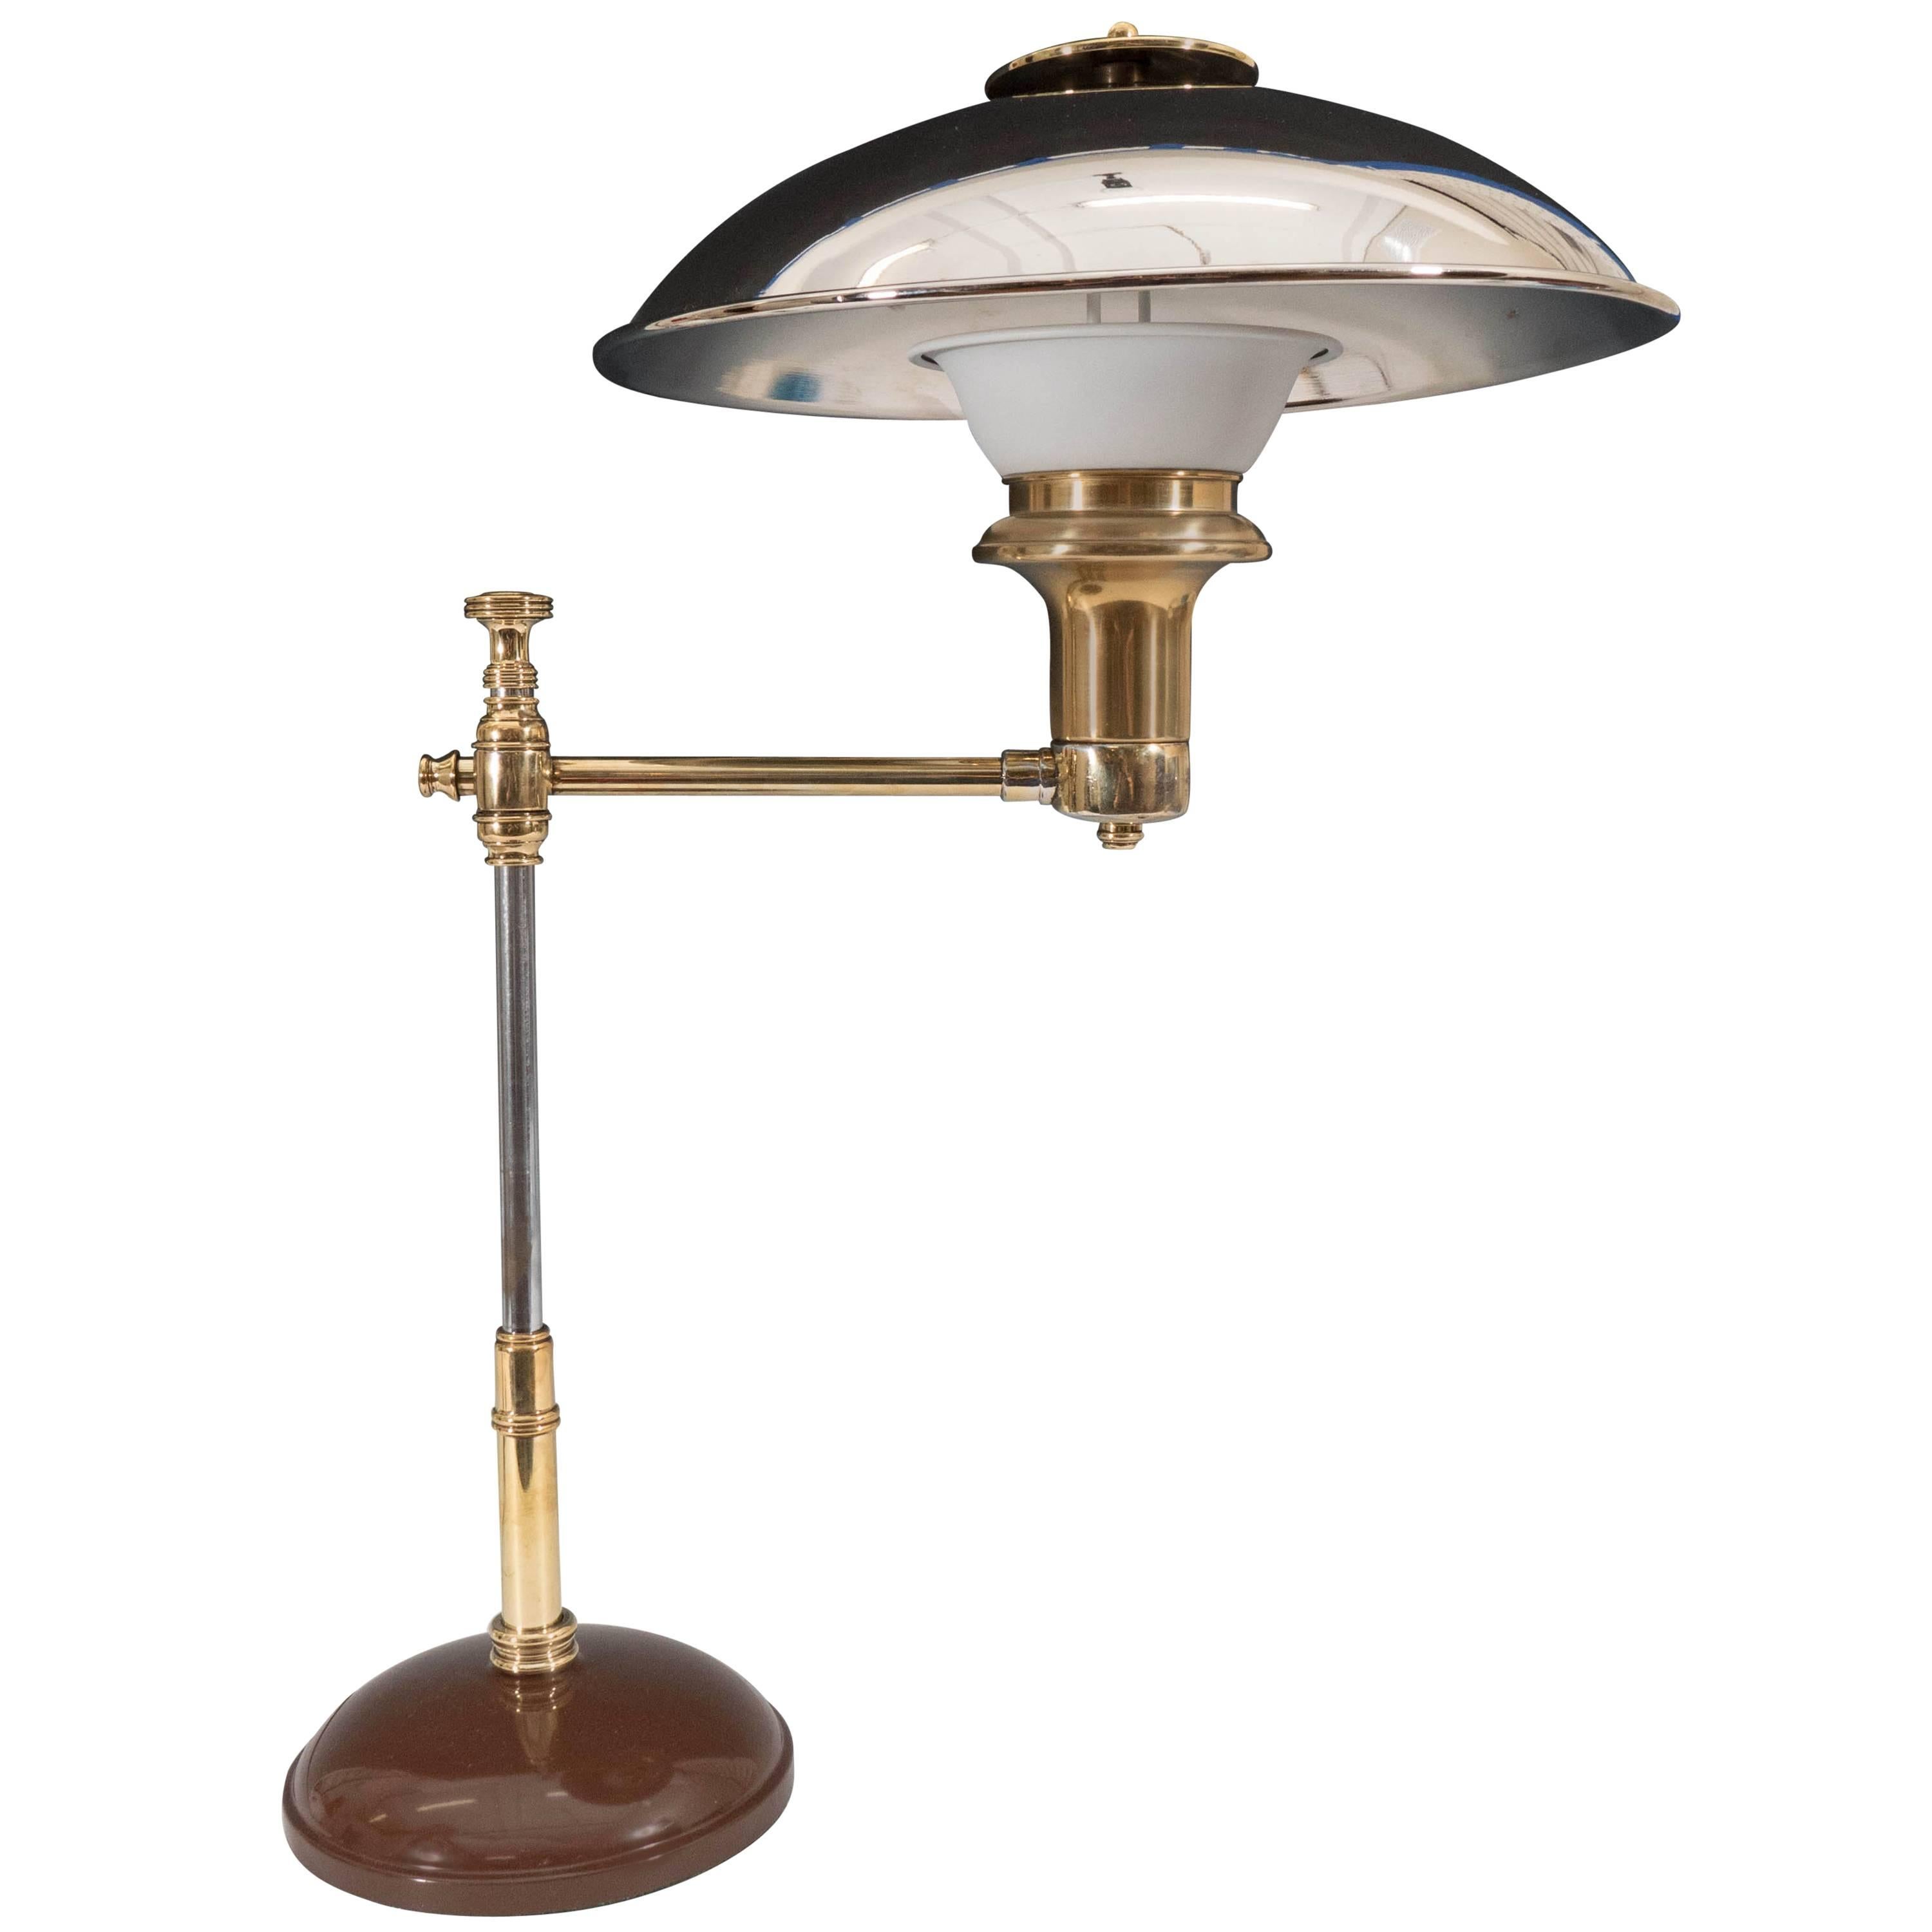 Scandinavian 1940s Table Lamp in Chrome-Plated Brass